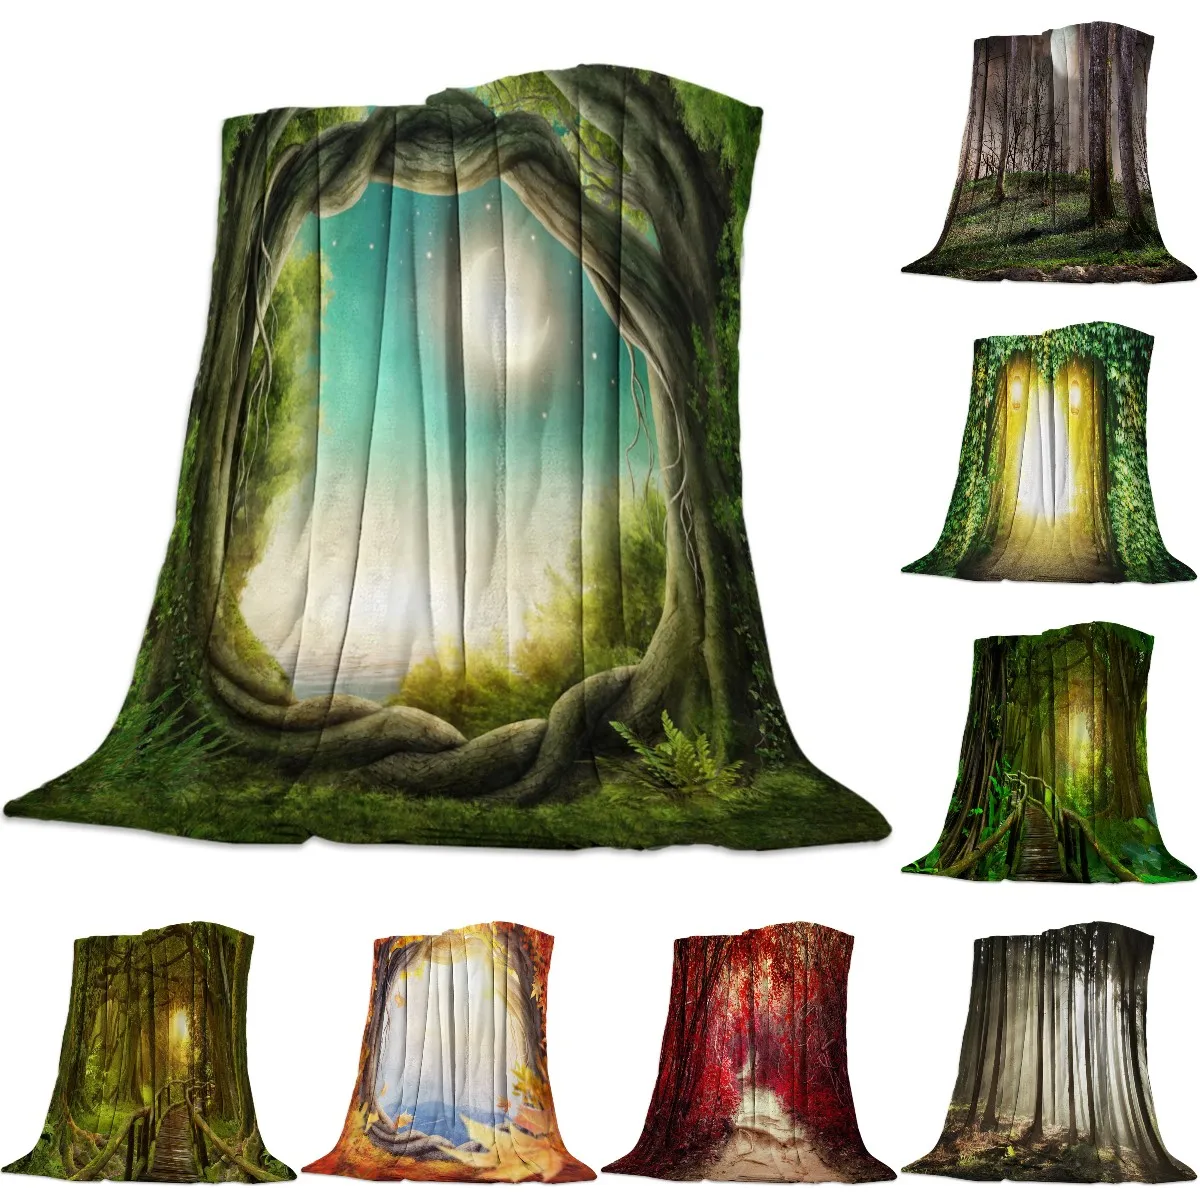 

Fleece Throw Bed Blanket Lightweight Super Soft Cozy Jungle Trees Fantasy Starry Moon Throw Blanket Gift for Adults Kids Queen